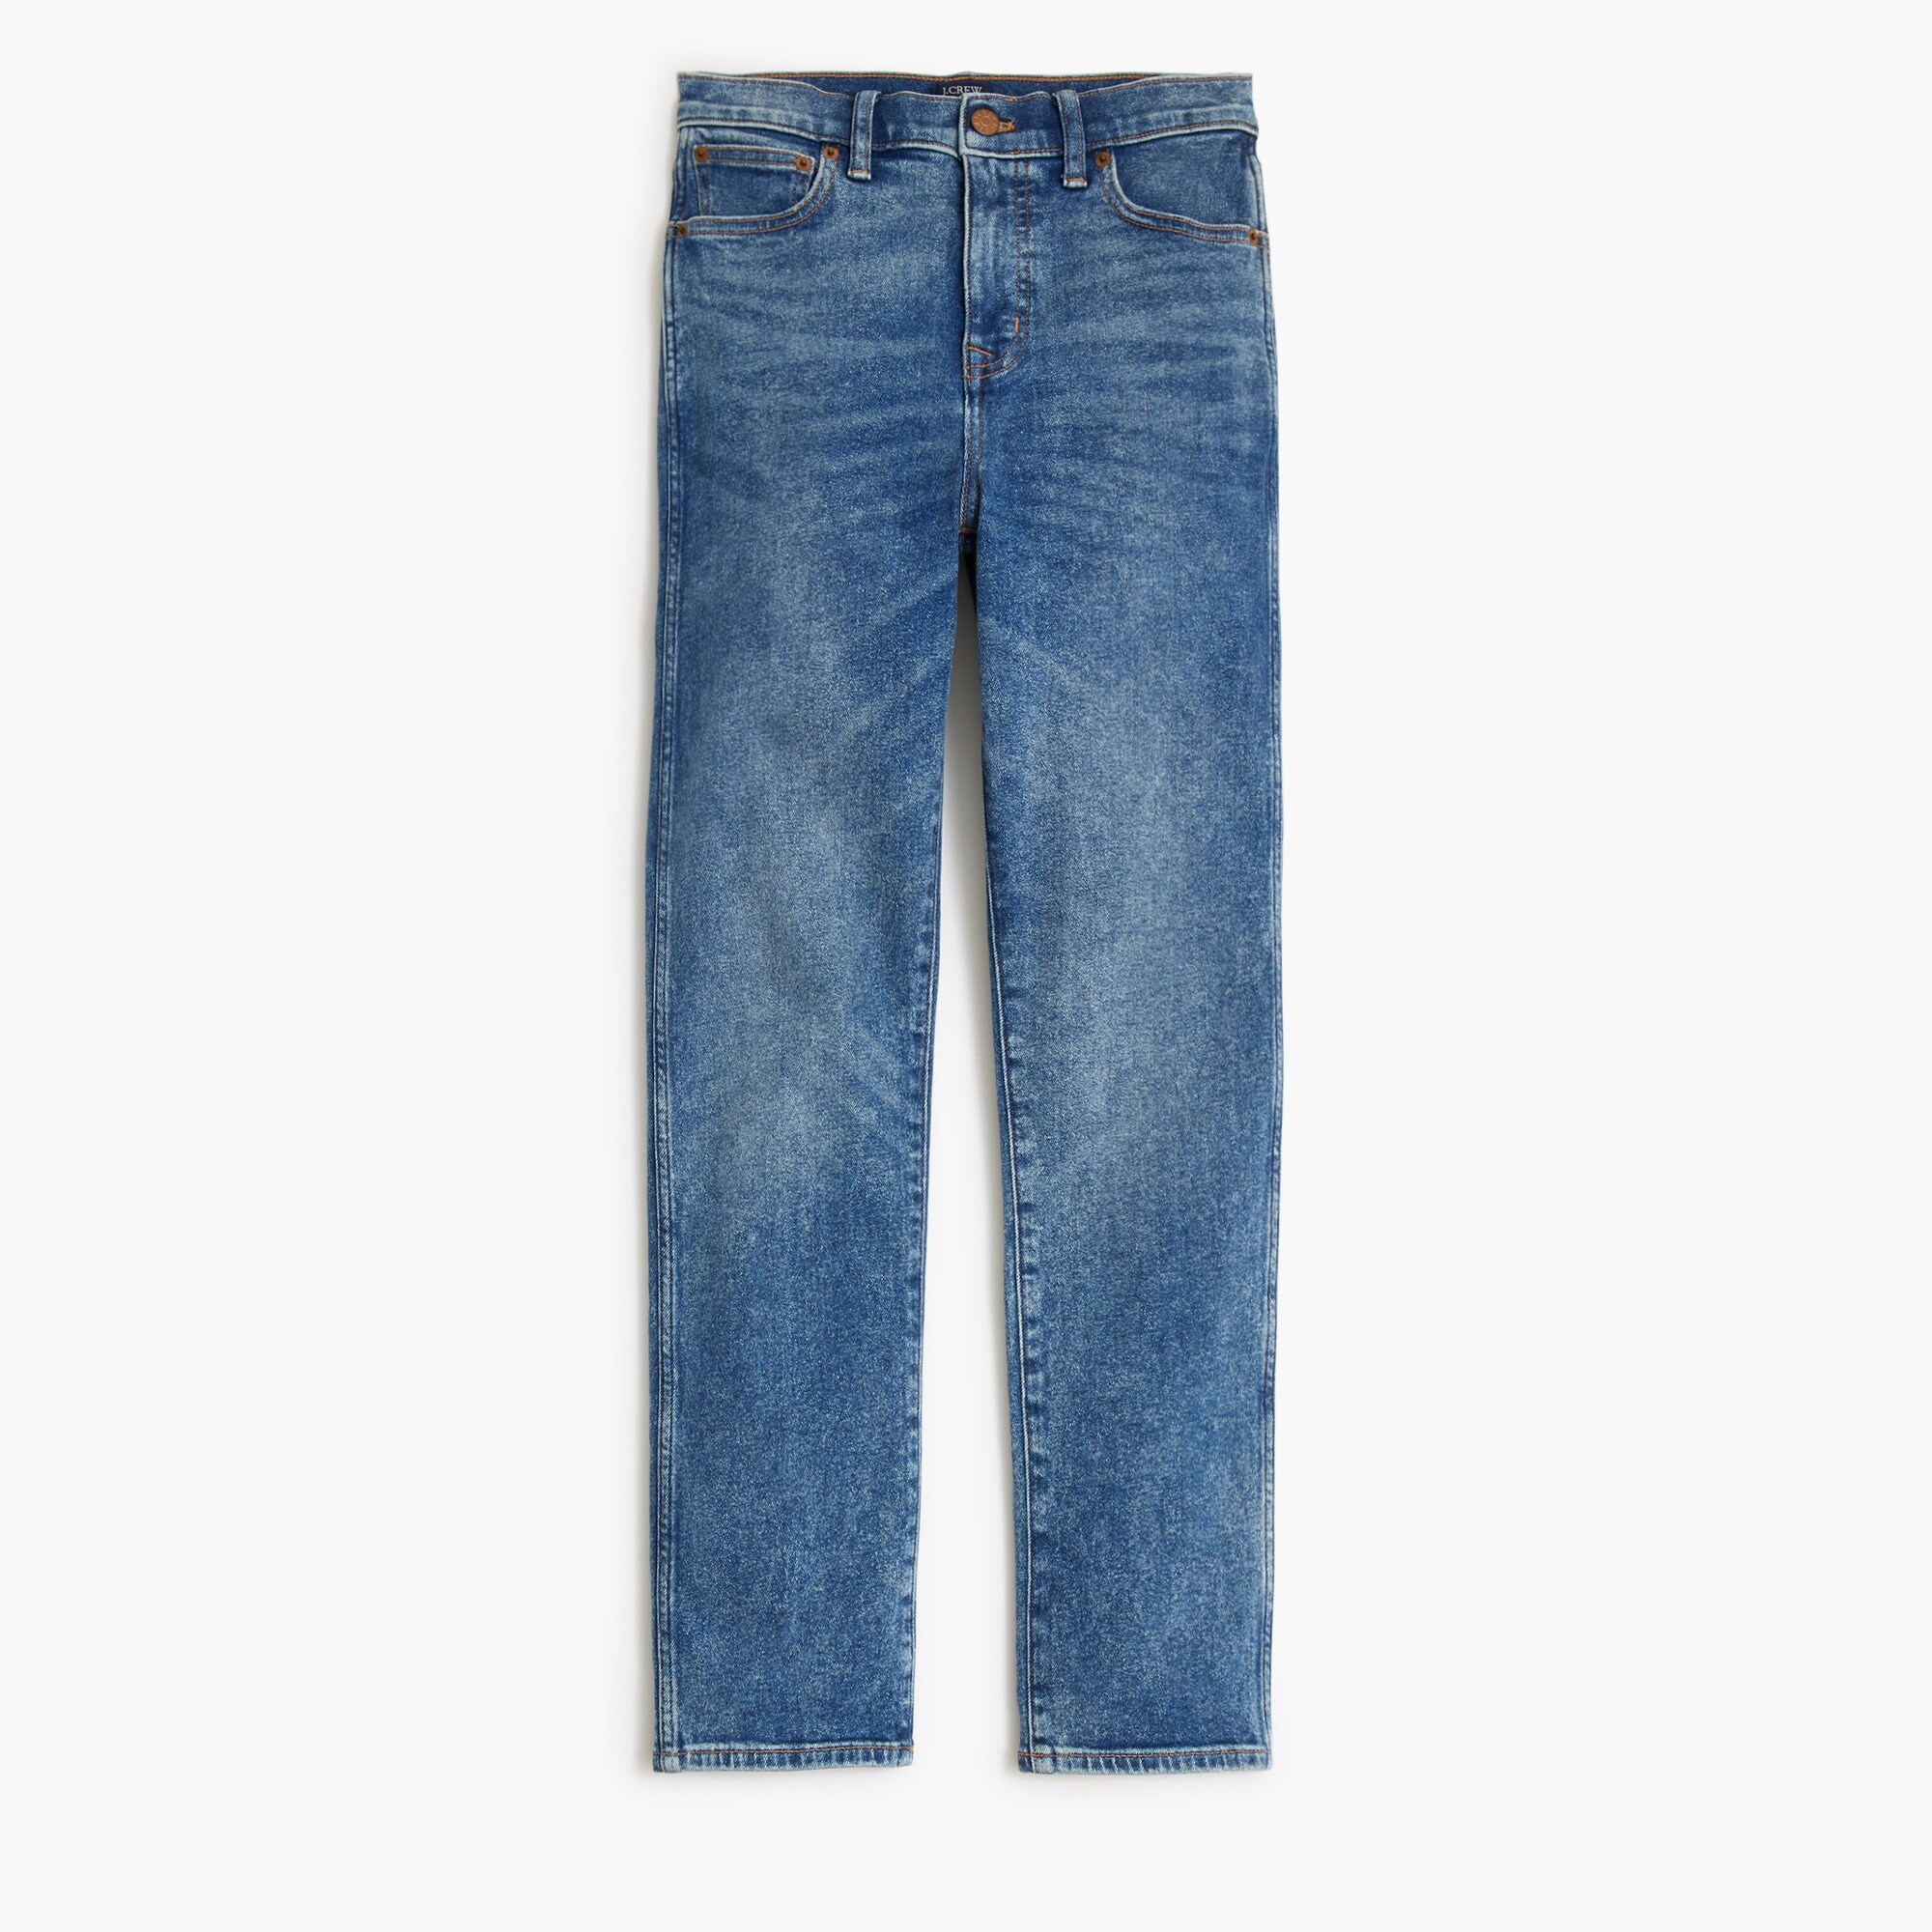  Classic vintage jean in all-day stretch